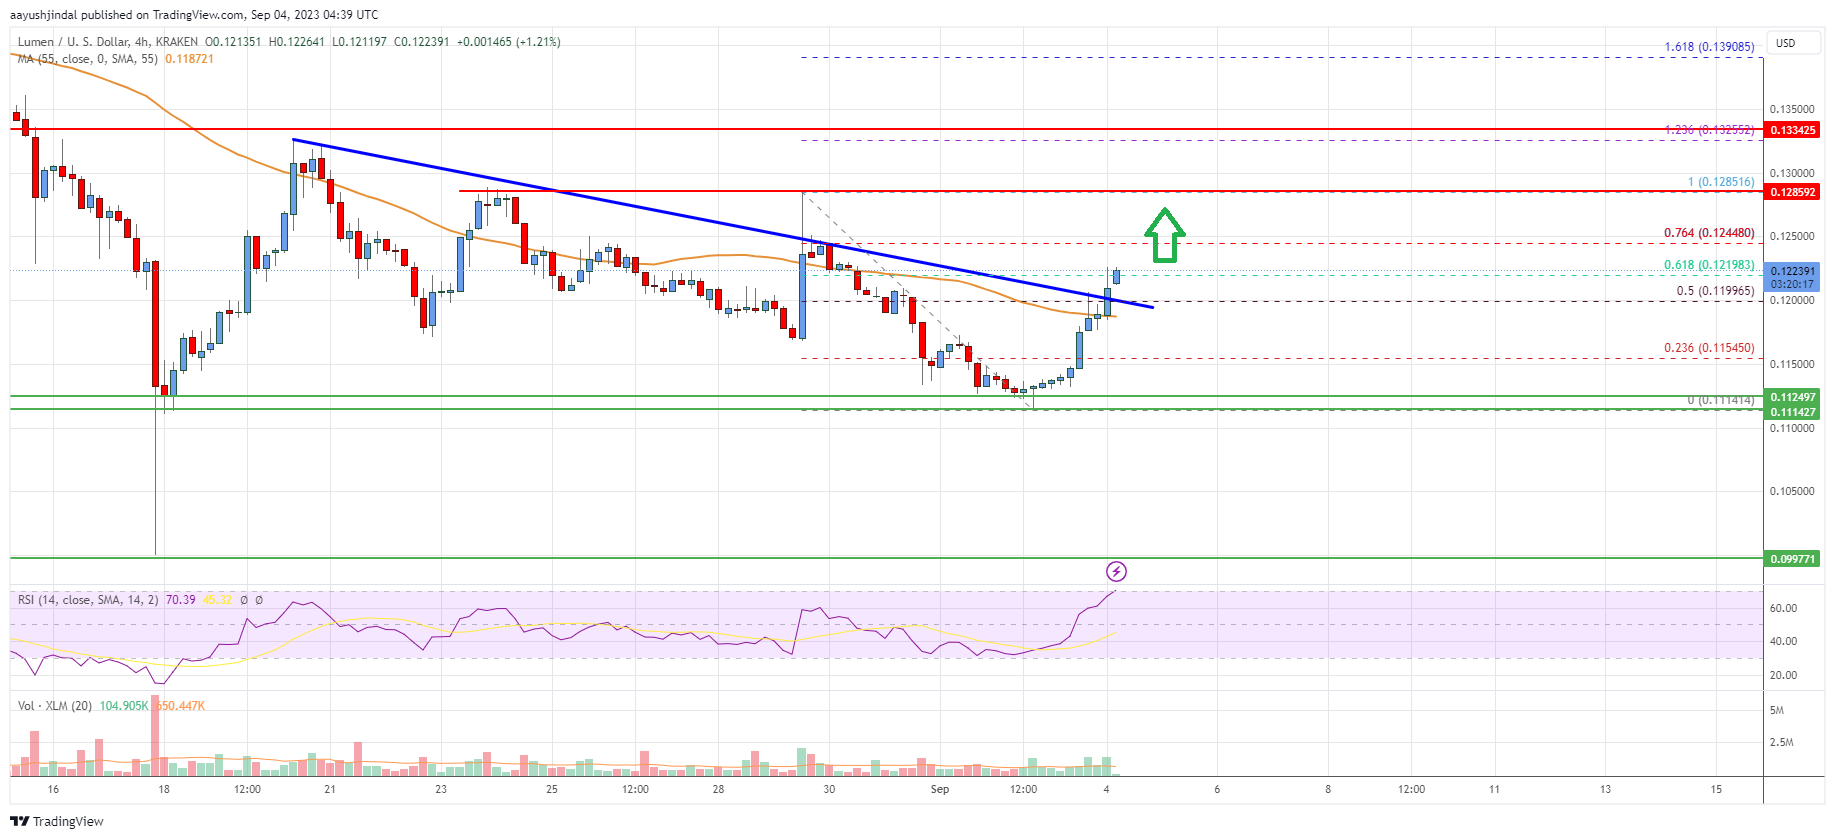 Stellar Lumen (XLM) Price Could Recover and Revisit $0.15